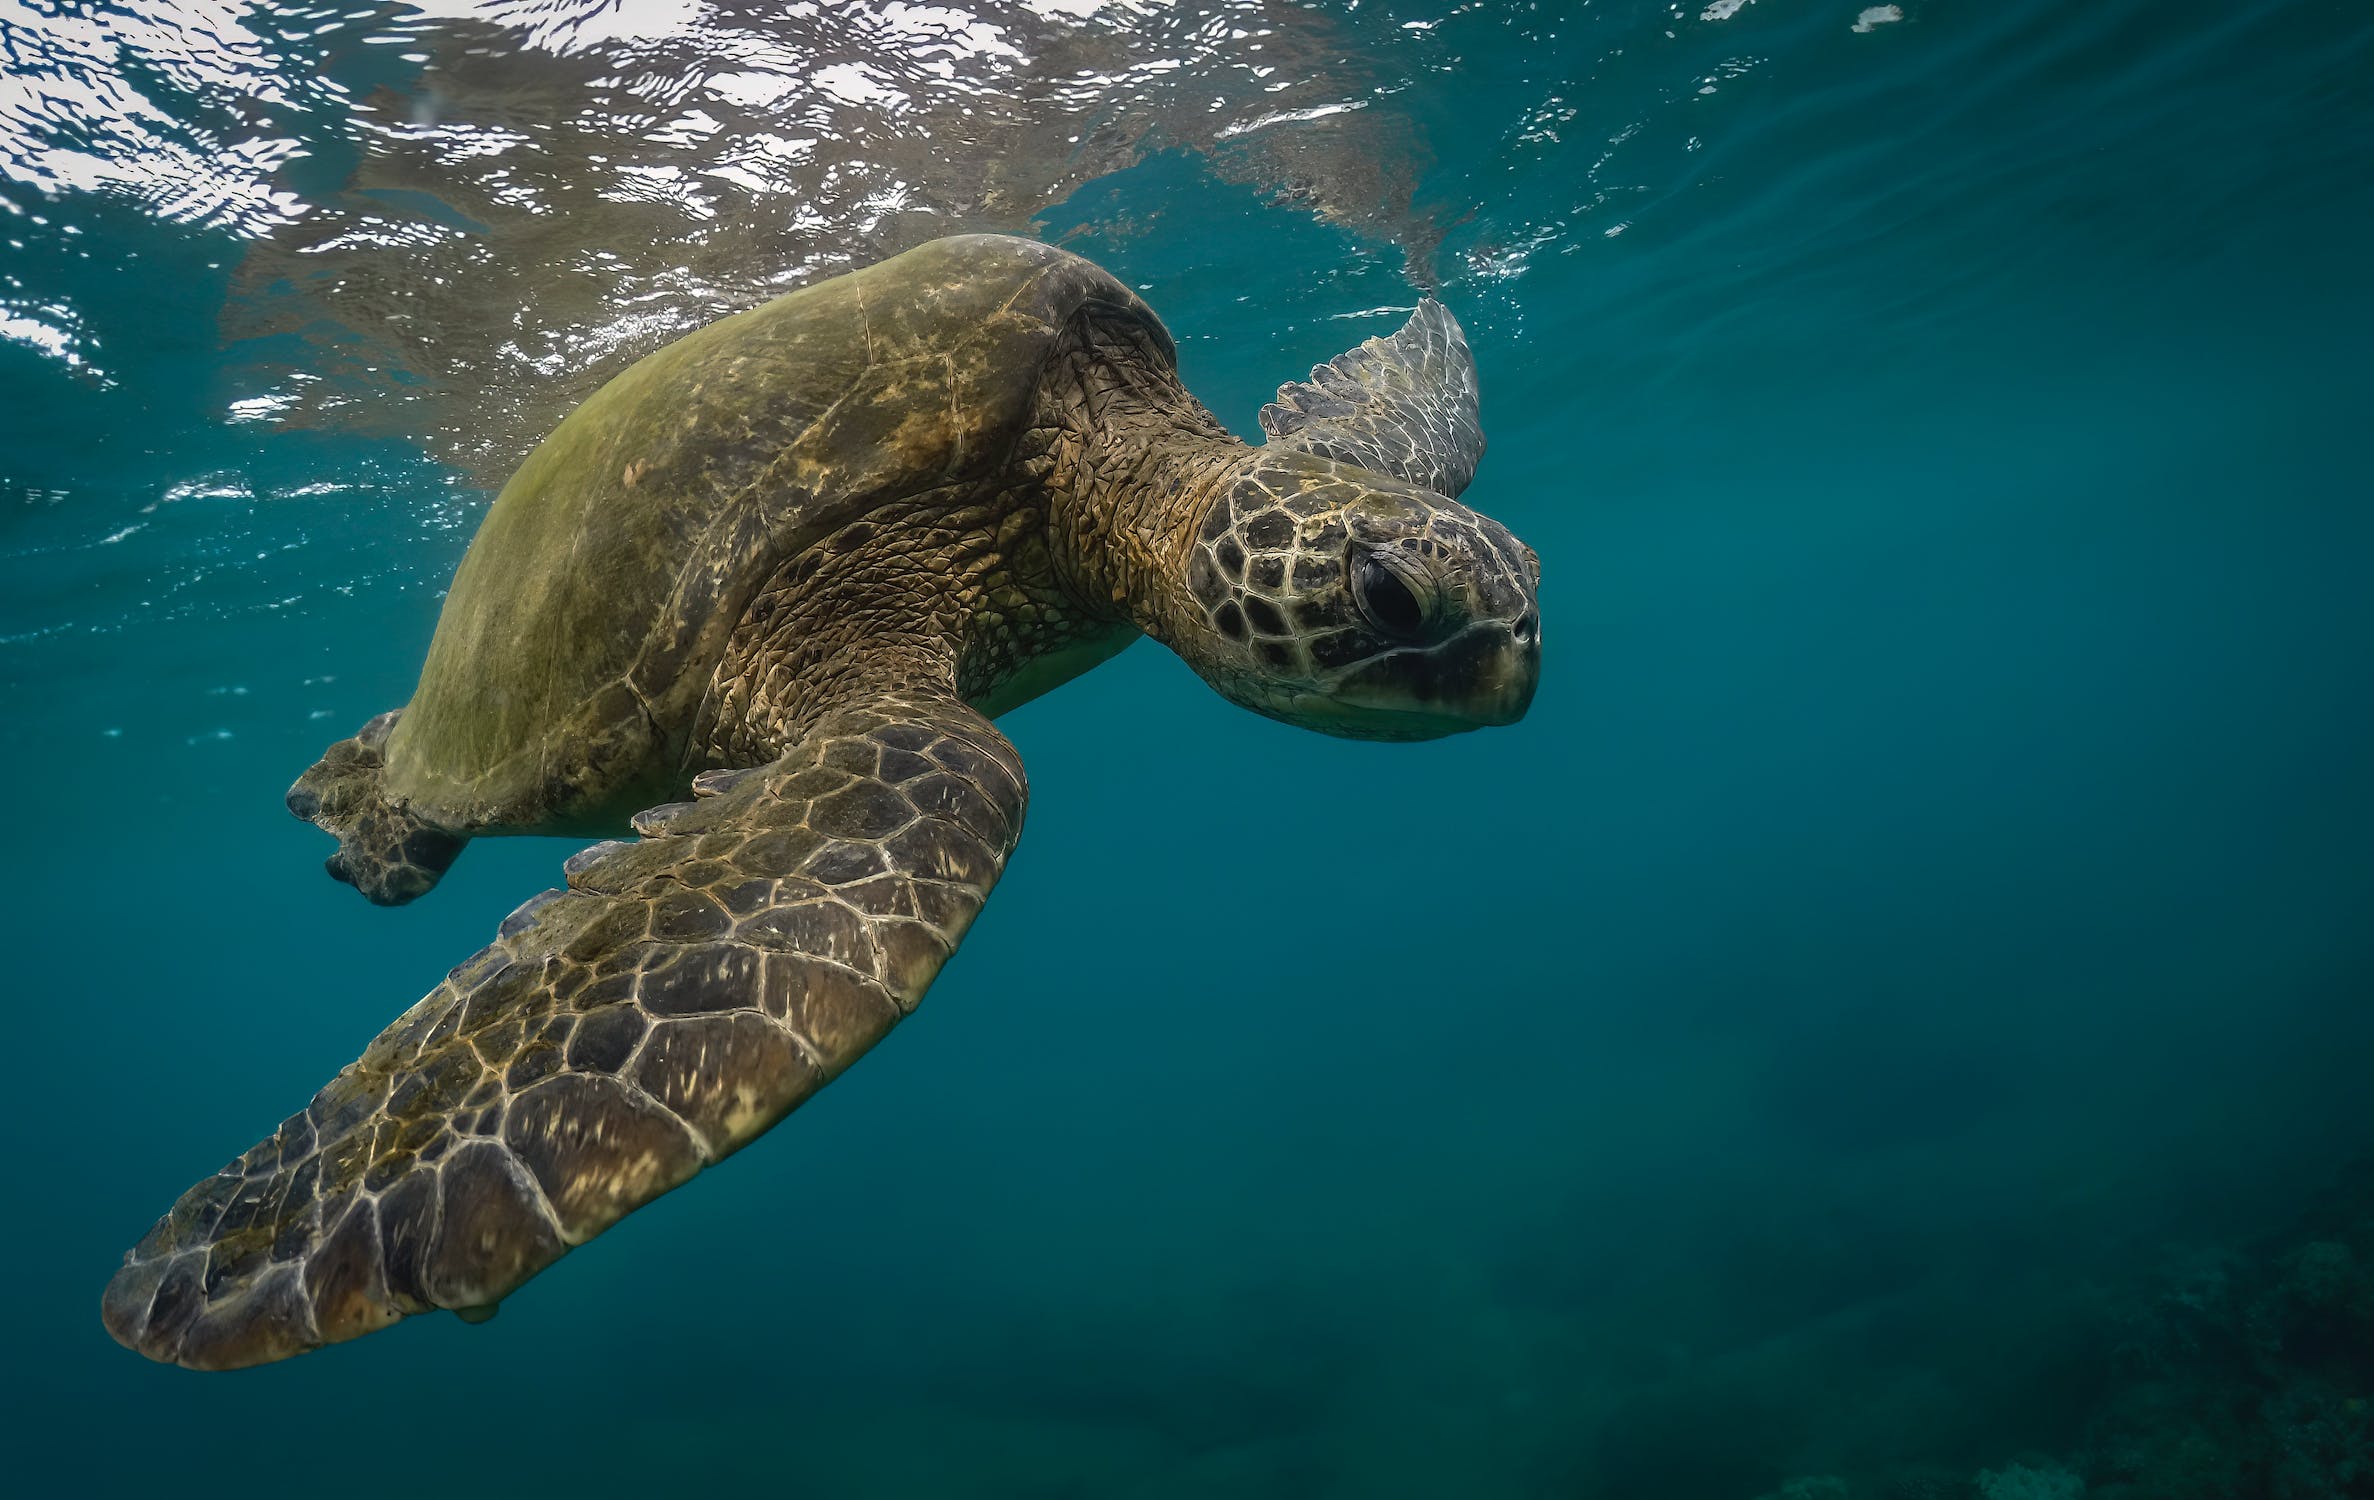 The sex ratio of endangered sea turtles is badly skewed by pollution